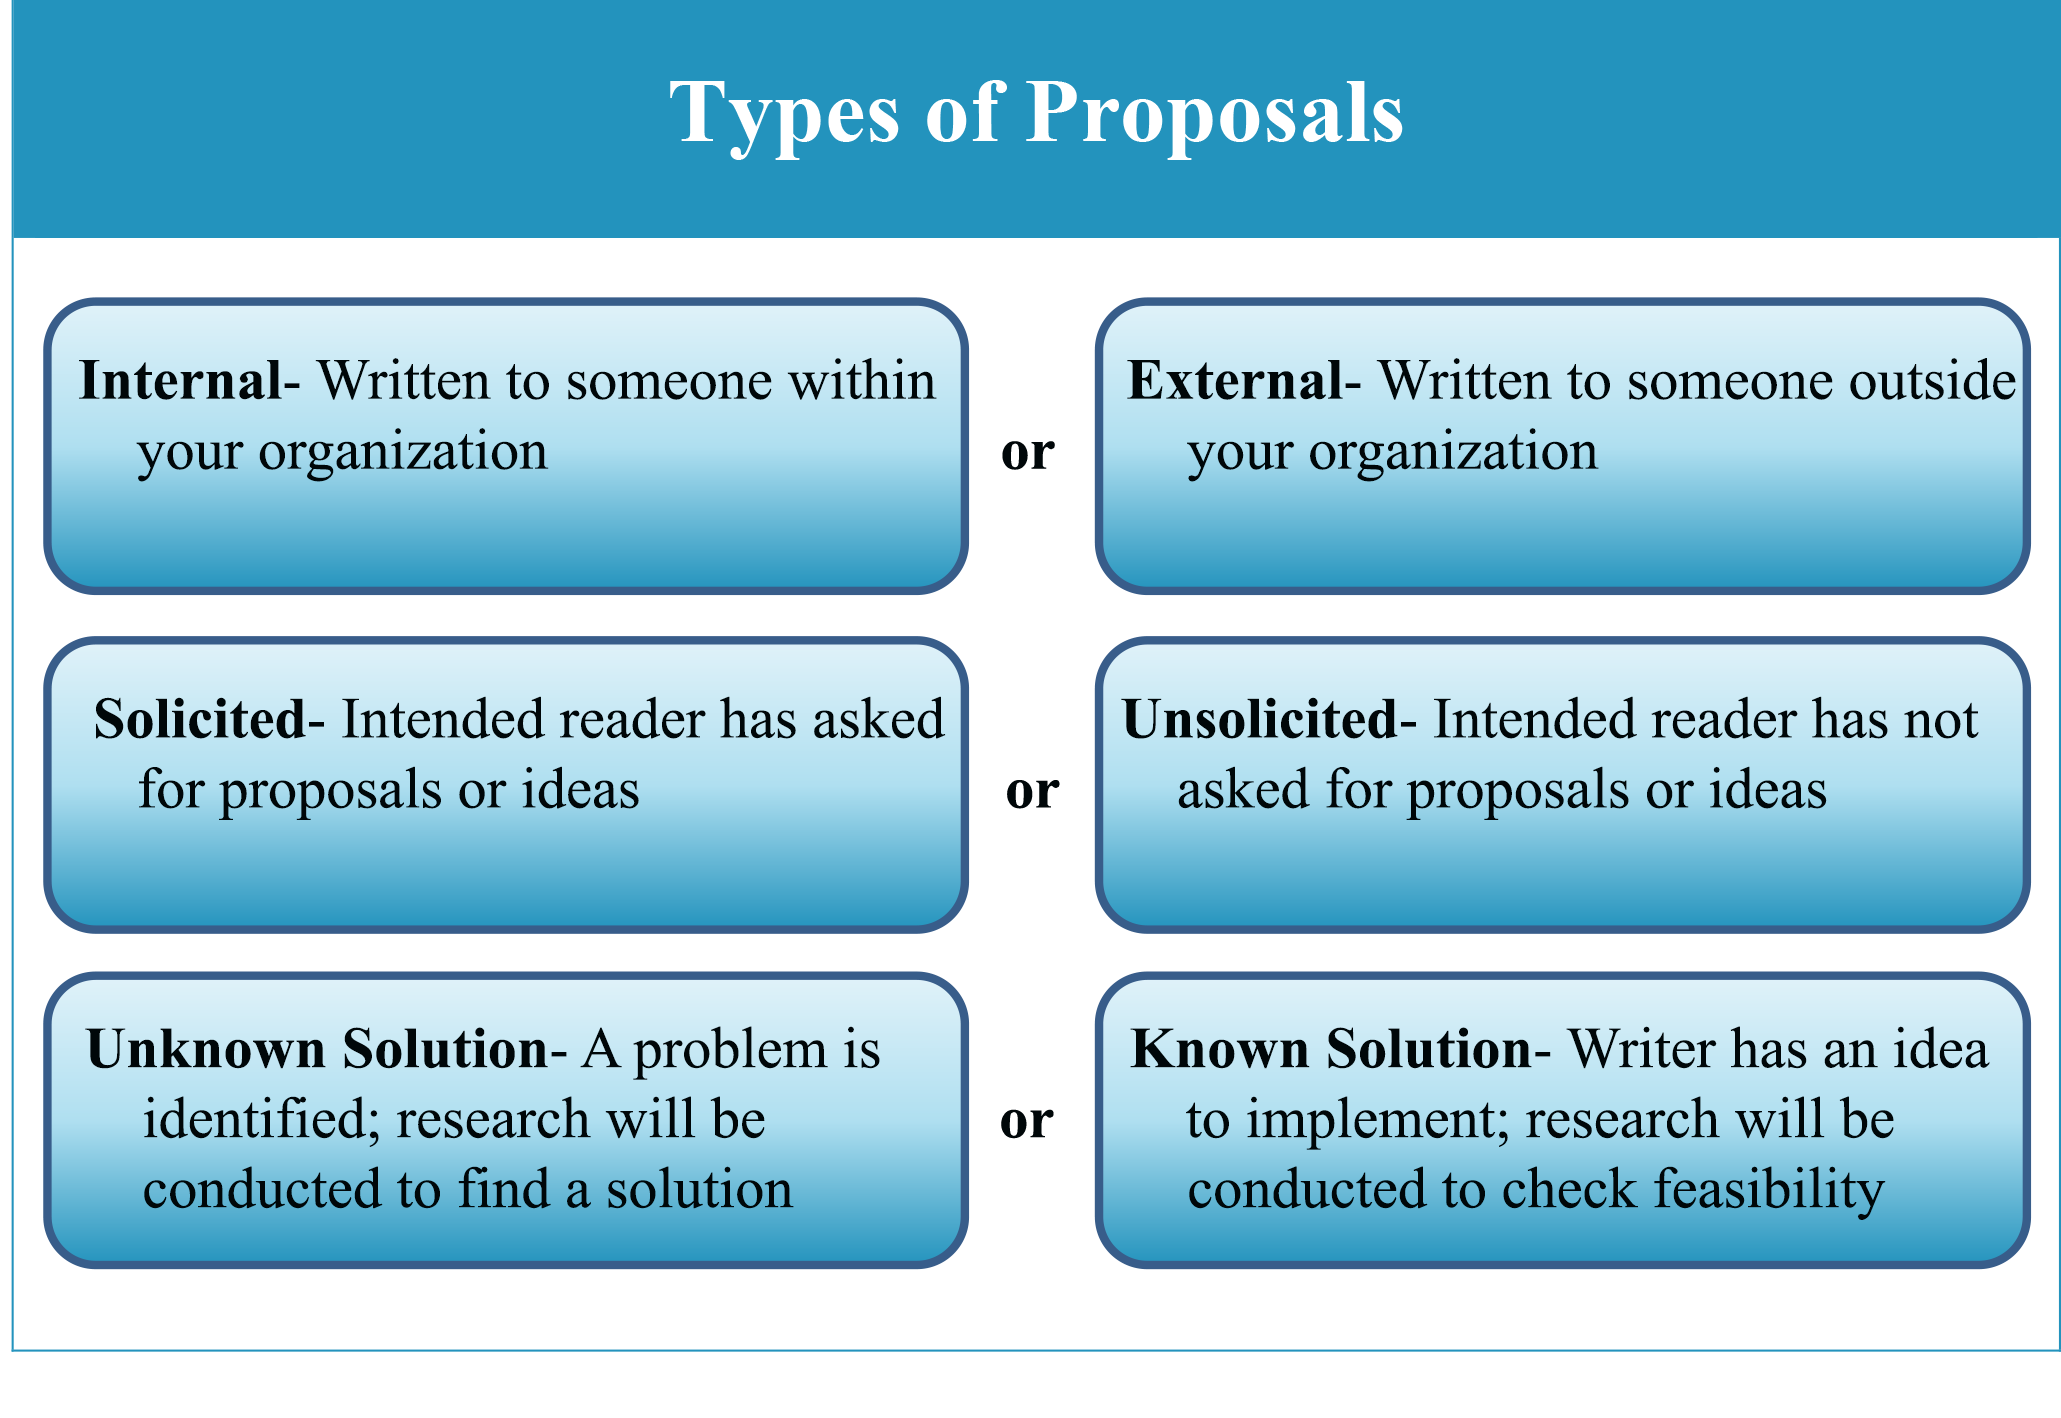 research proposal and project proposal difference